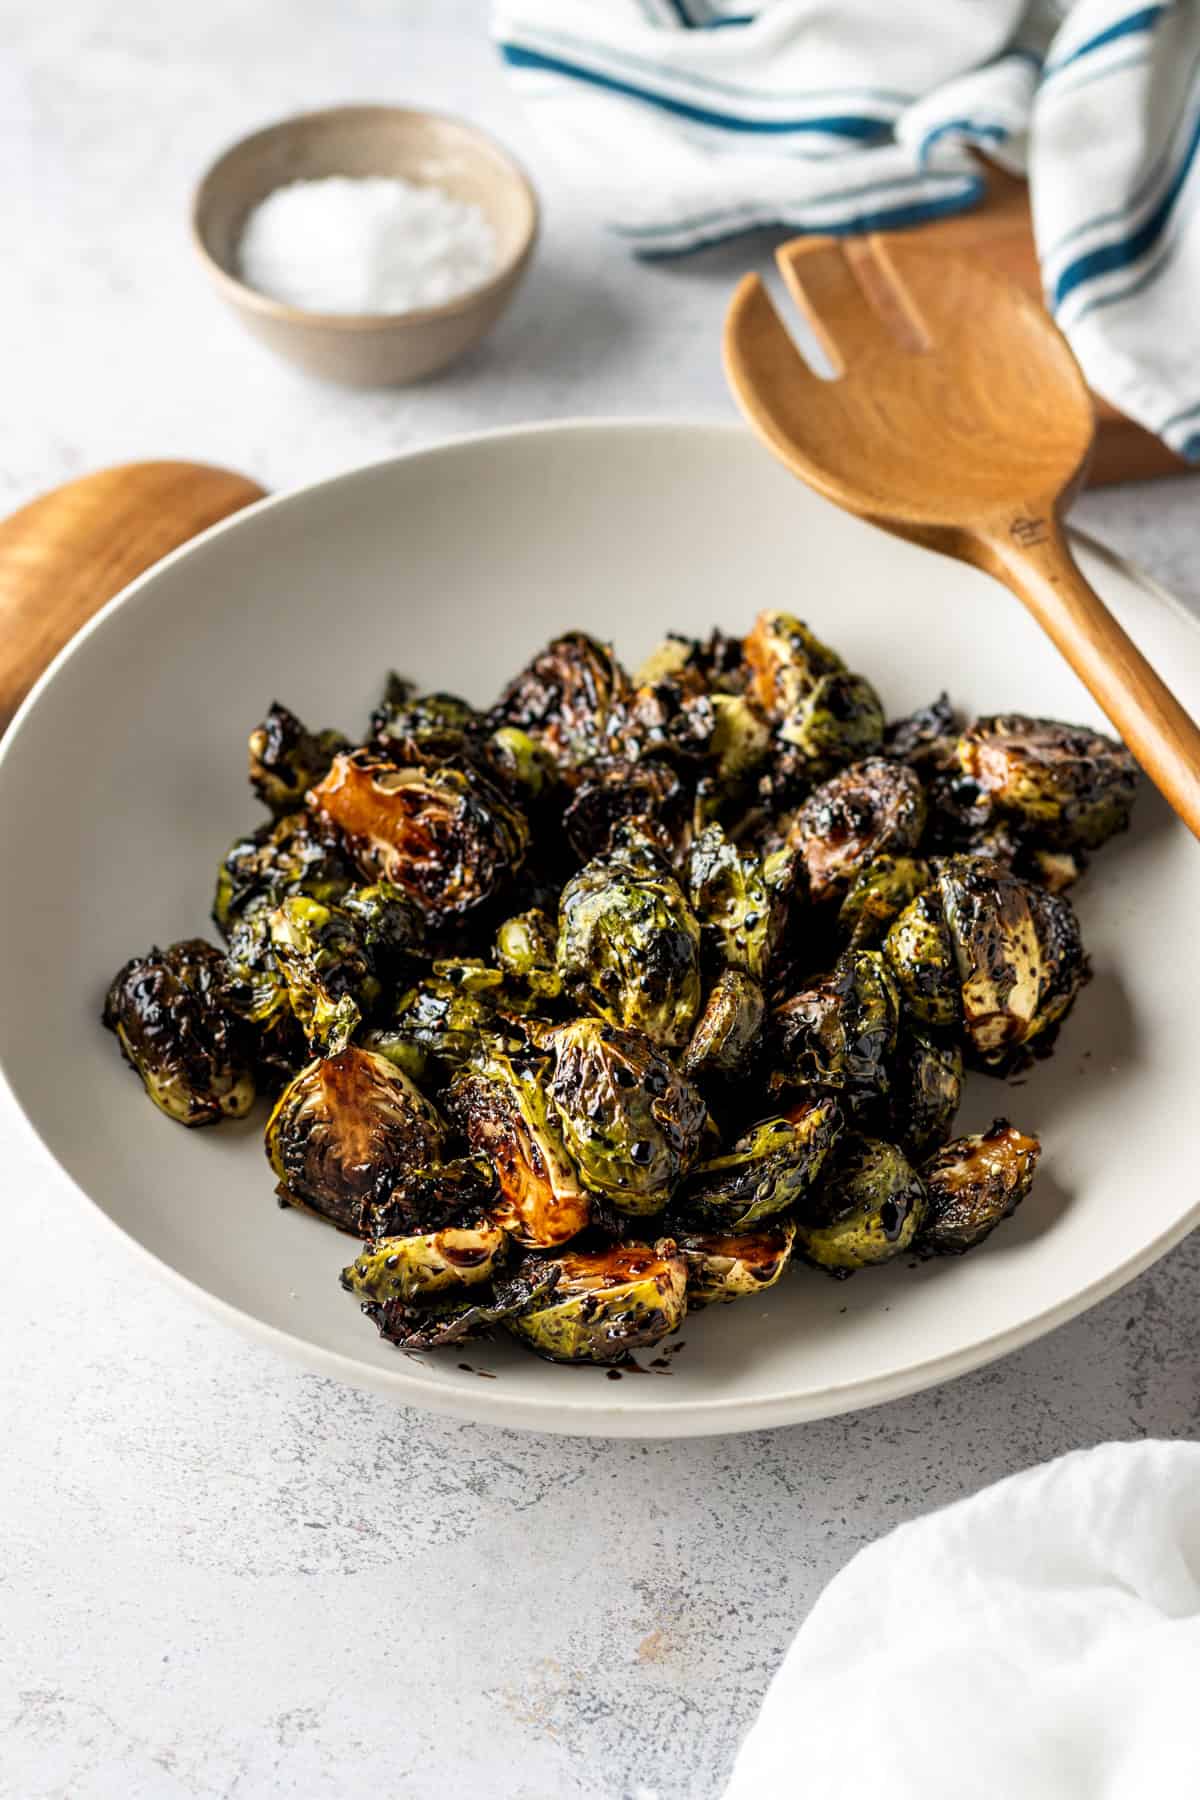 A while bowl filled with Roasted Brussels sprouts and balsamic glaze with large wooden serving utensils.